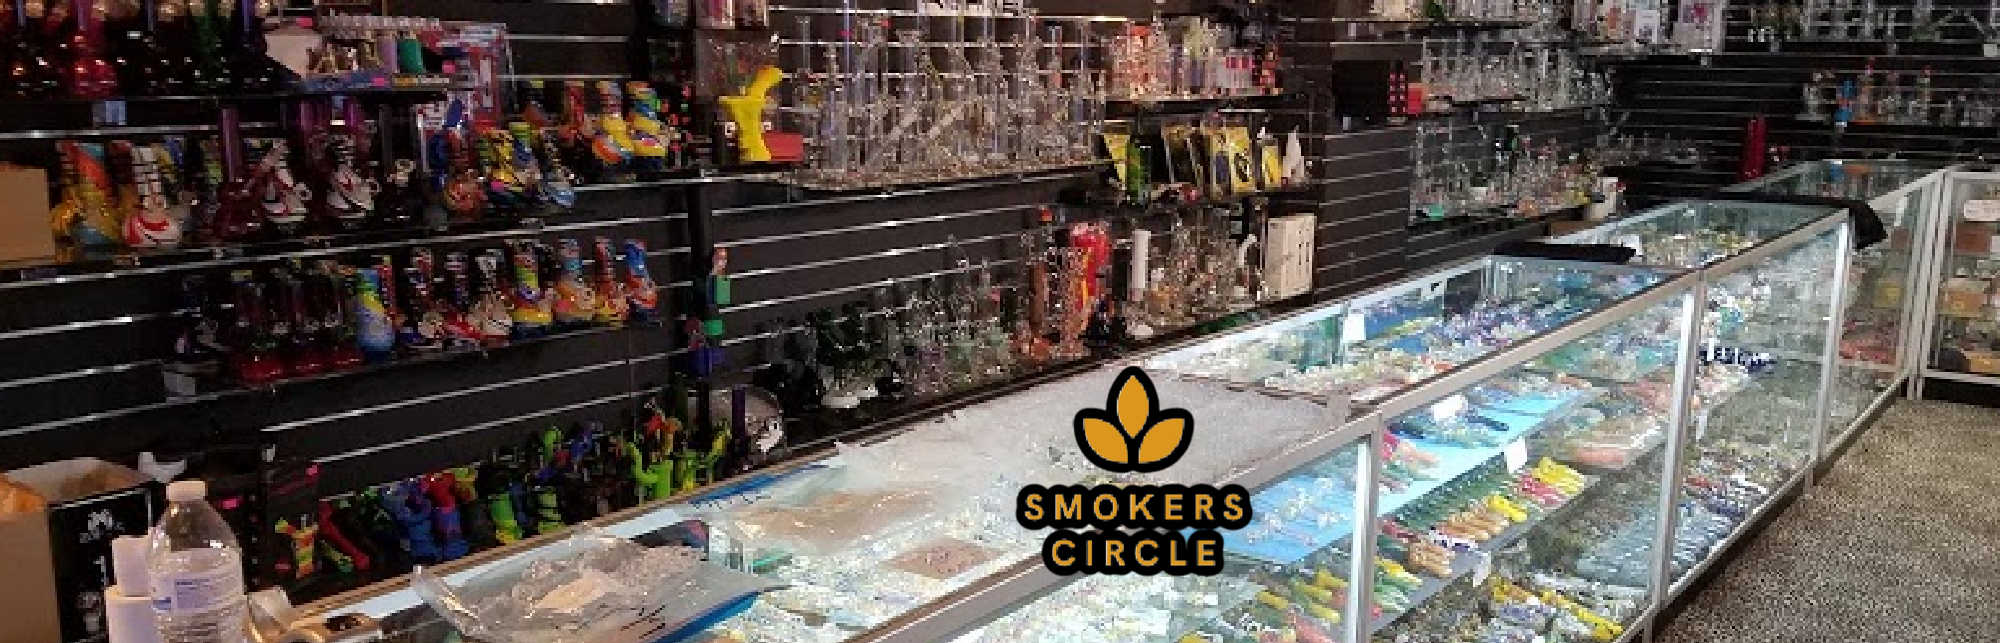 image of smokers circle i north fort myers